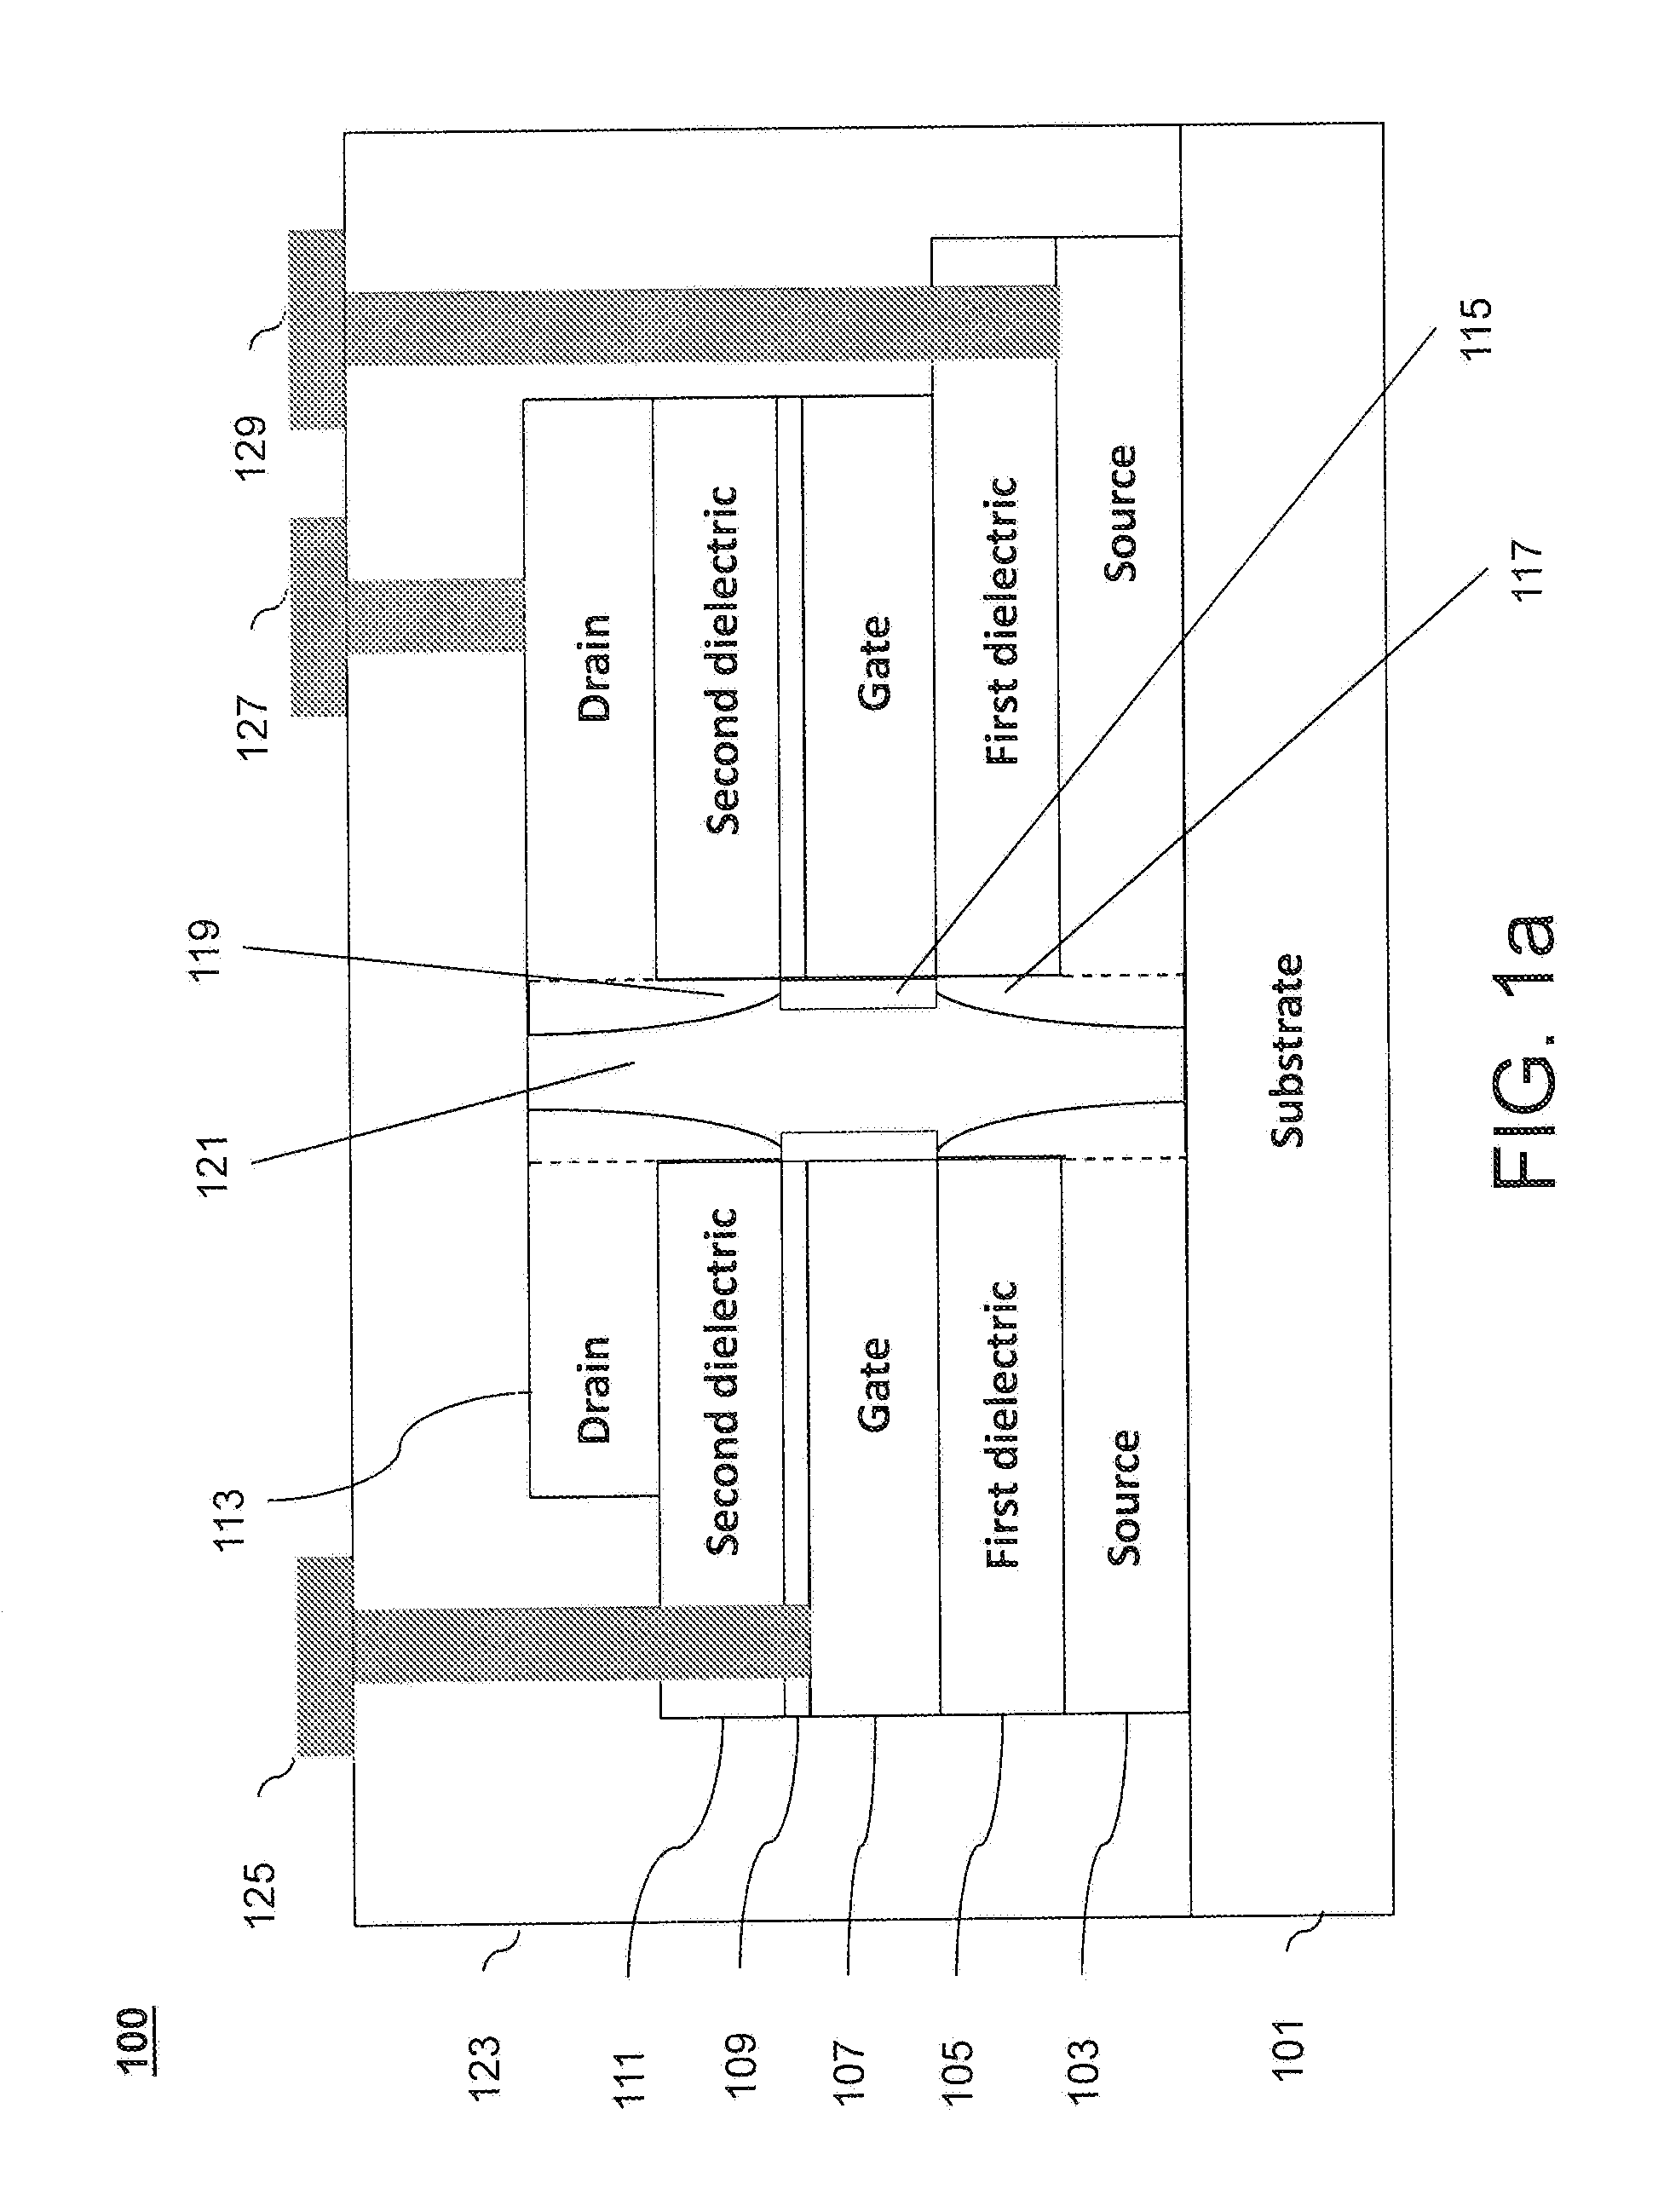 Semiconductor device with a vertical channel